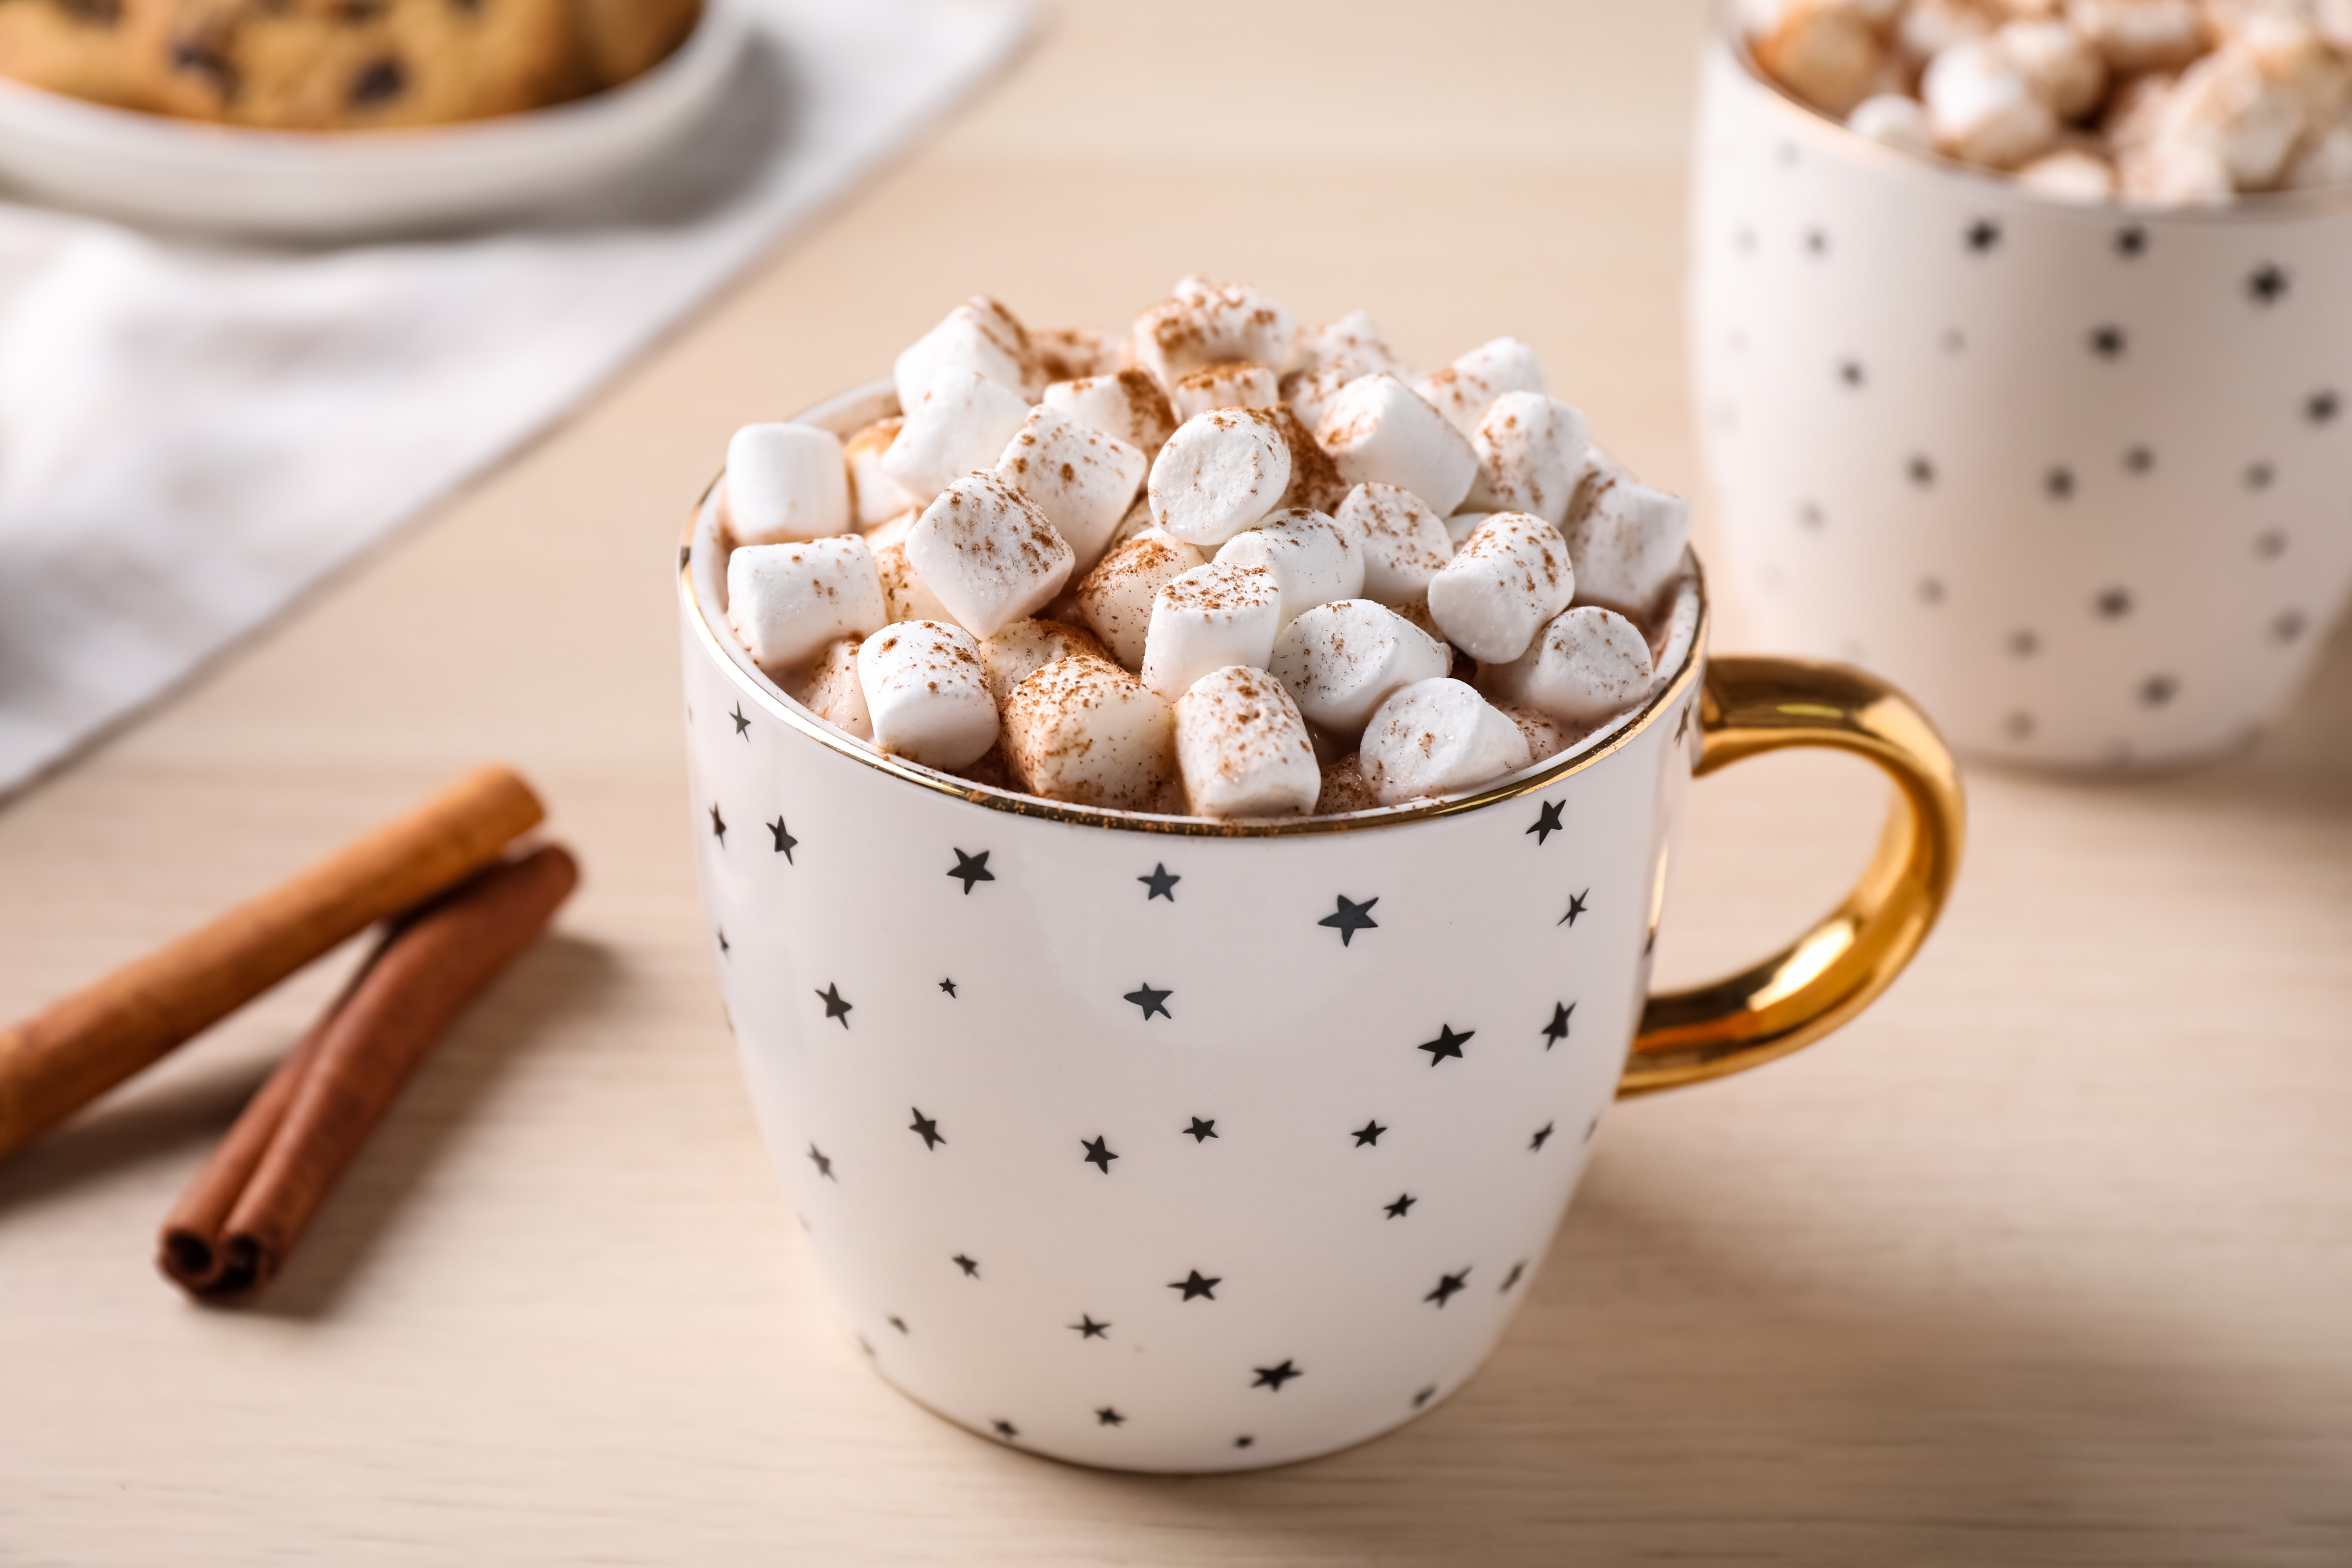 A cup of hot chocolate with lots of little marshmallows.